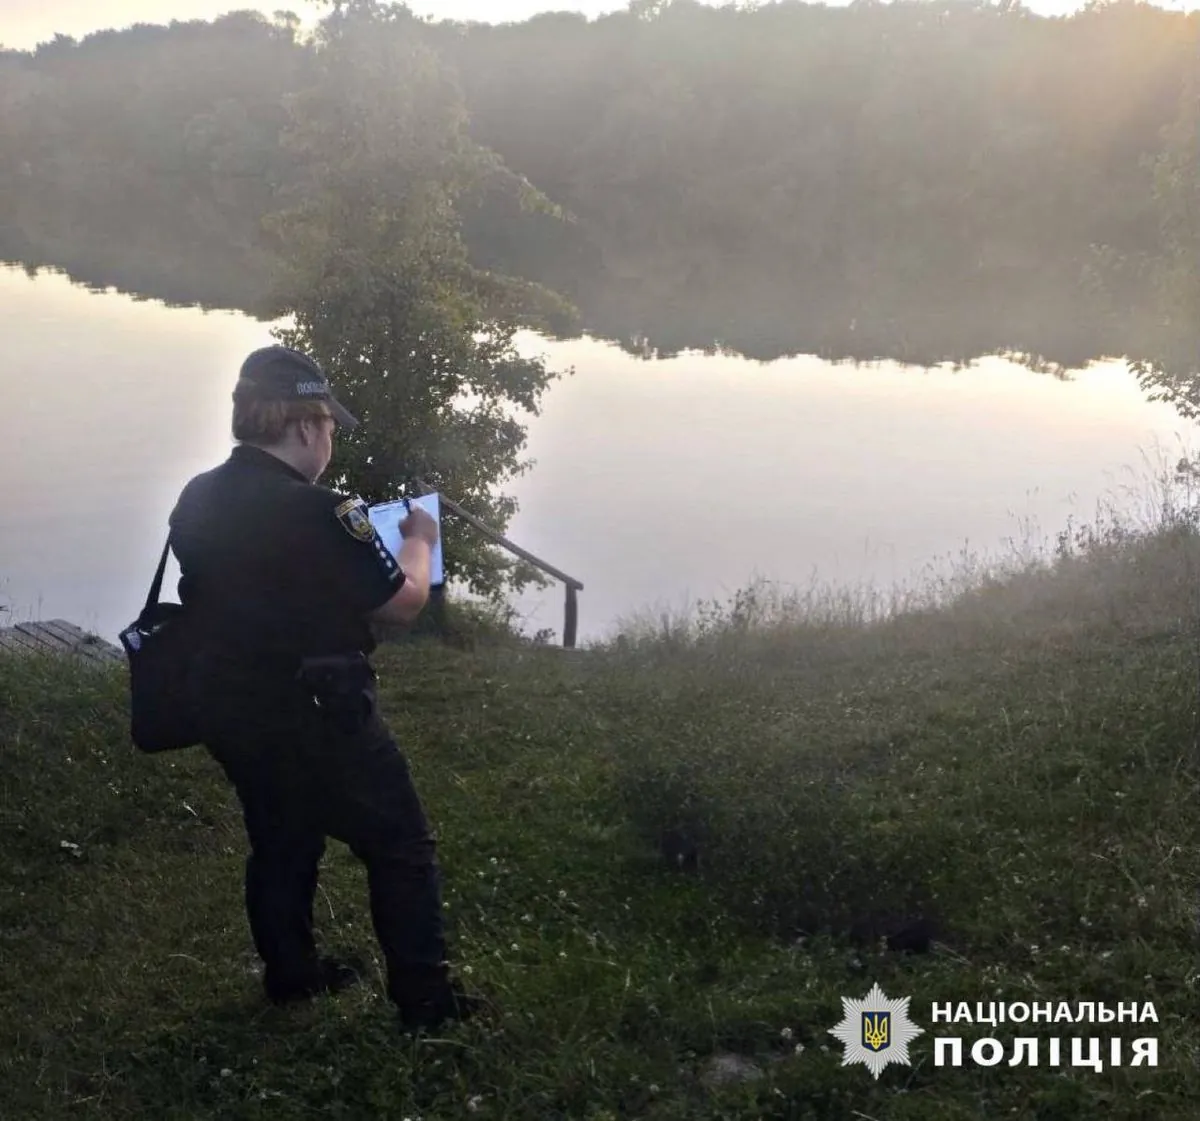 Body of drowned man found in river in Kyiv region